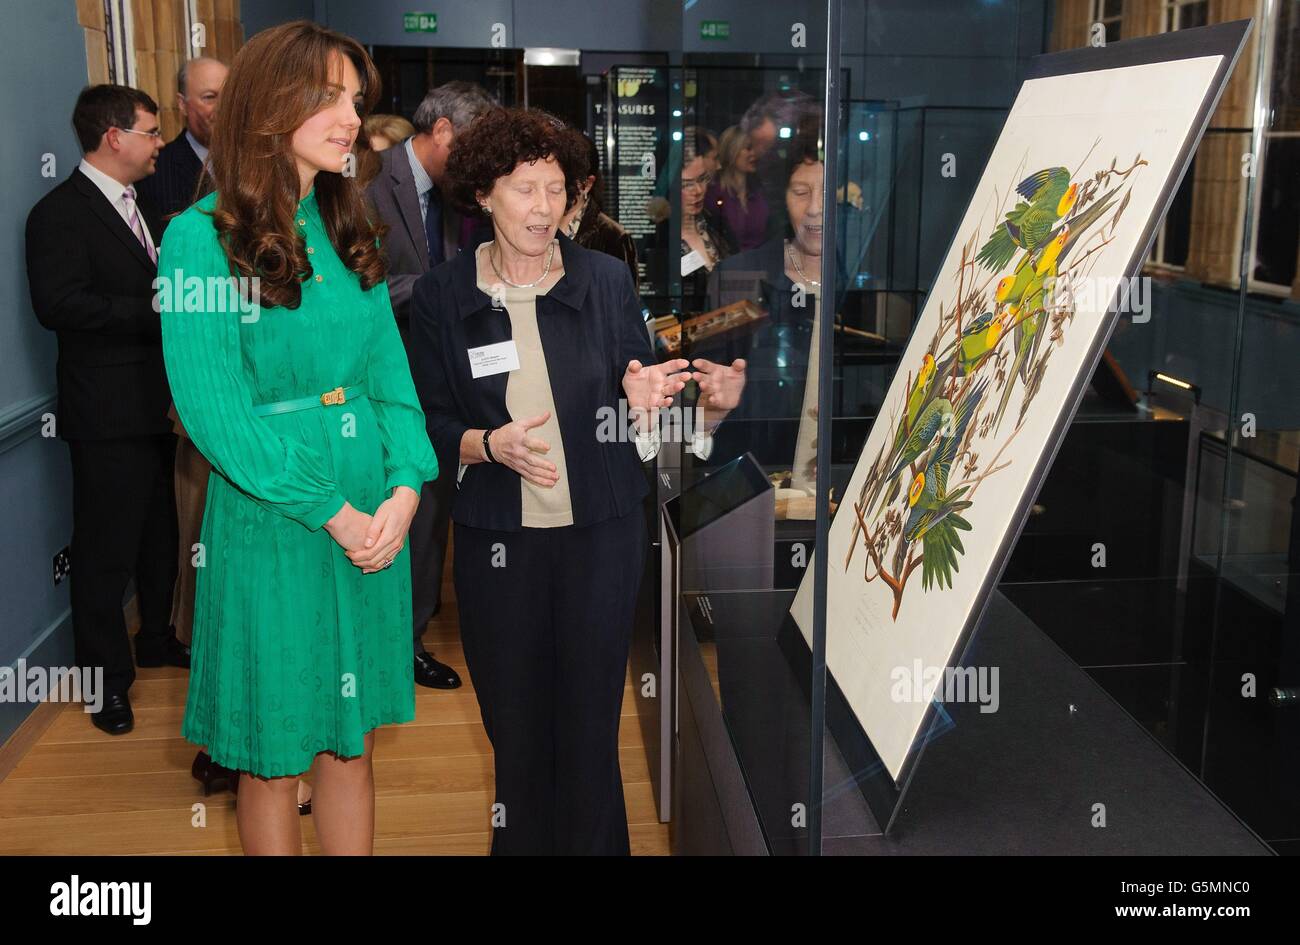 The Duchess of Cambridge views a plate from Audubon's Birds of America alongside Special Collections Manager Judith Magee (right) during a visit to officially open the new Treasures Gallery at the Natural History Museum, in central London. Stock Photo